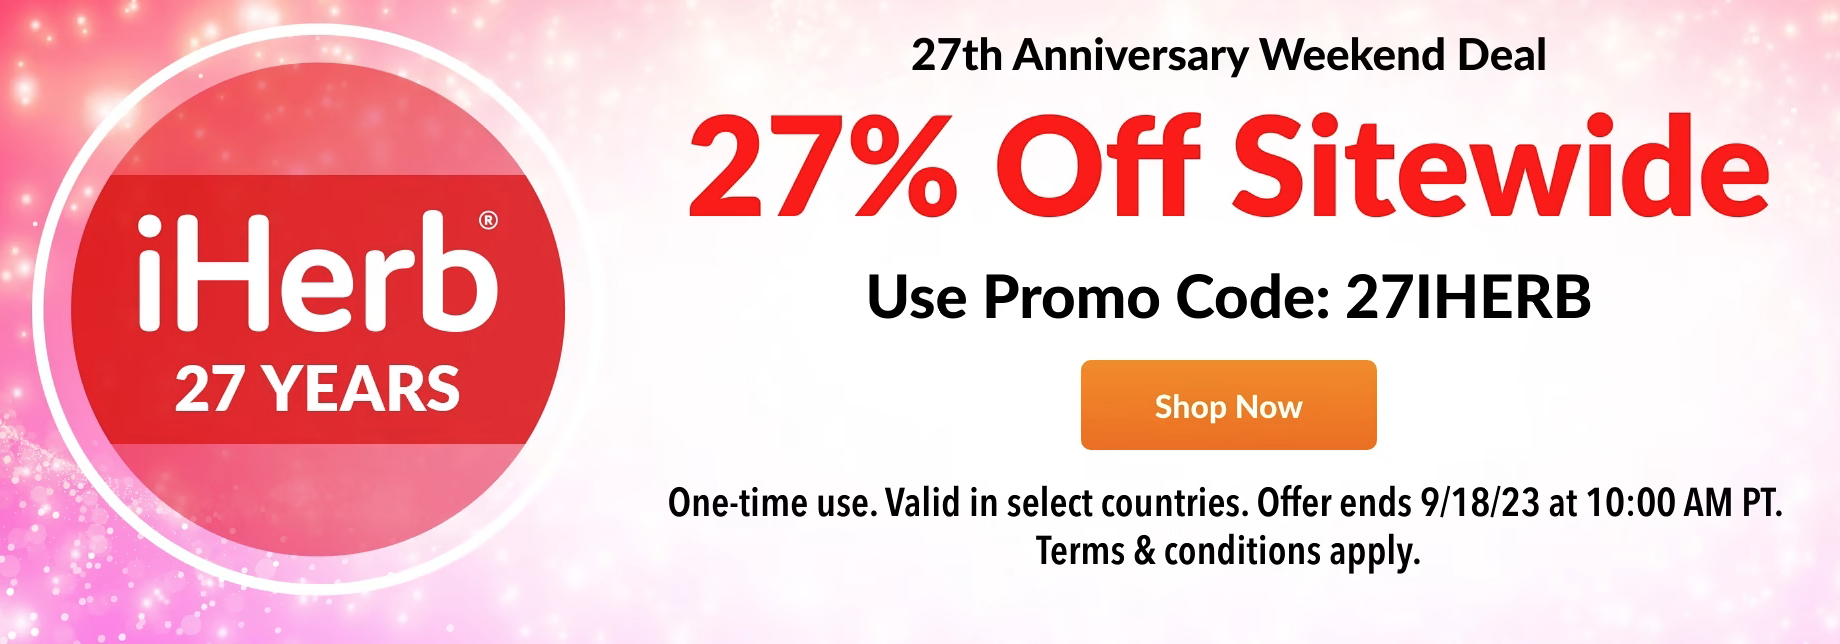 27% off sitewide at iHerb